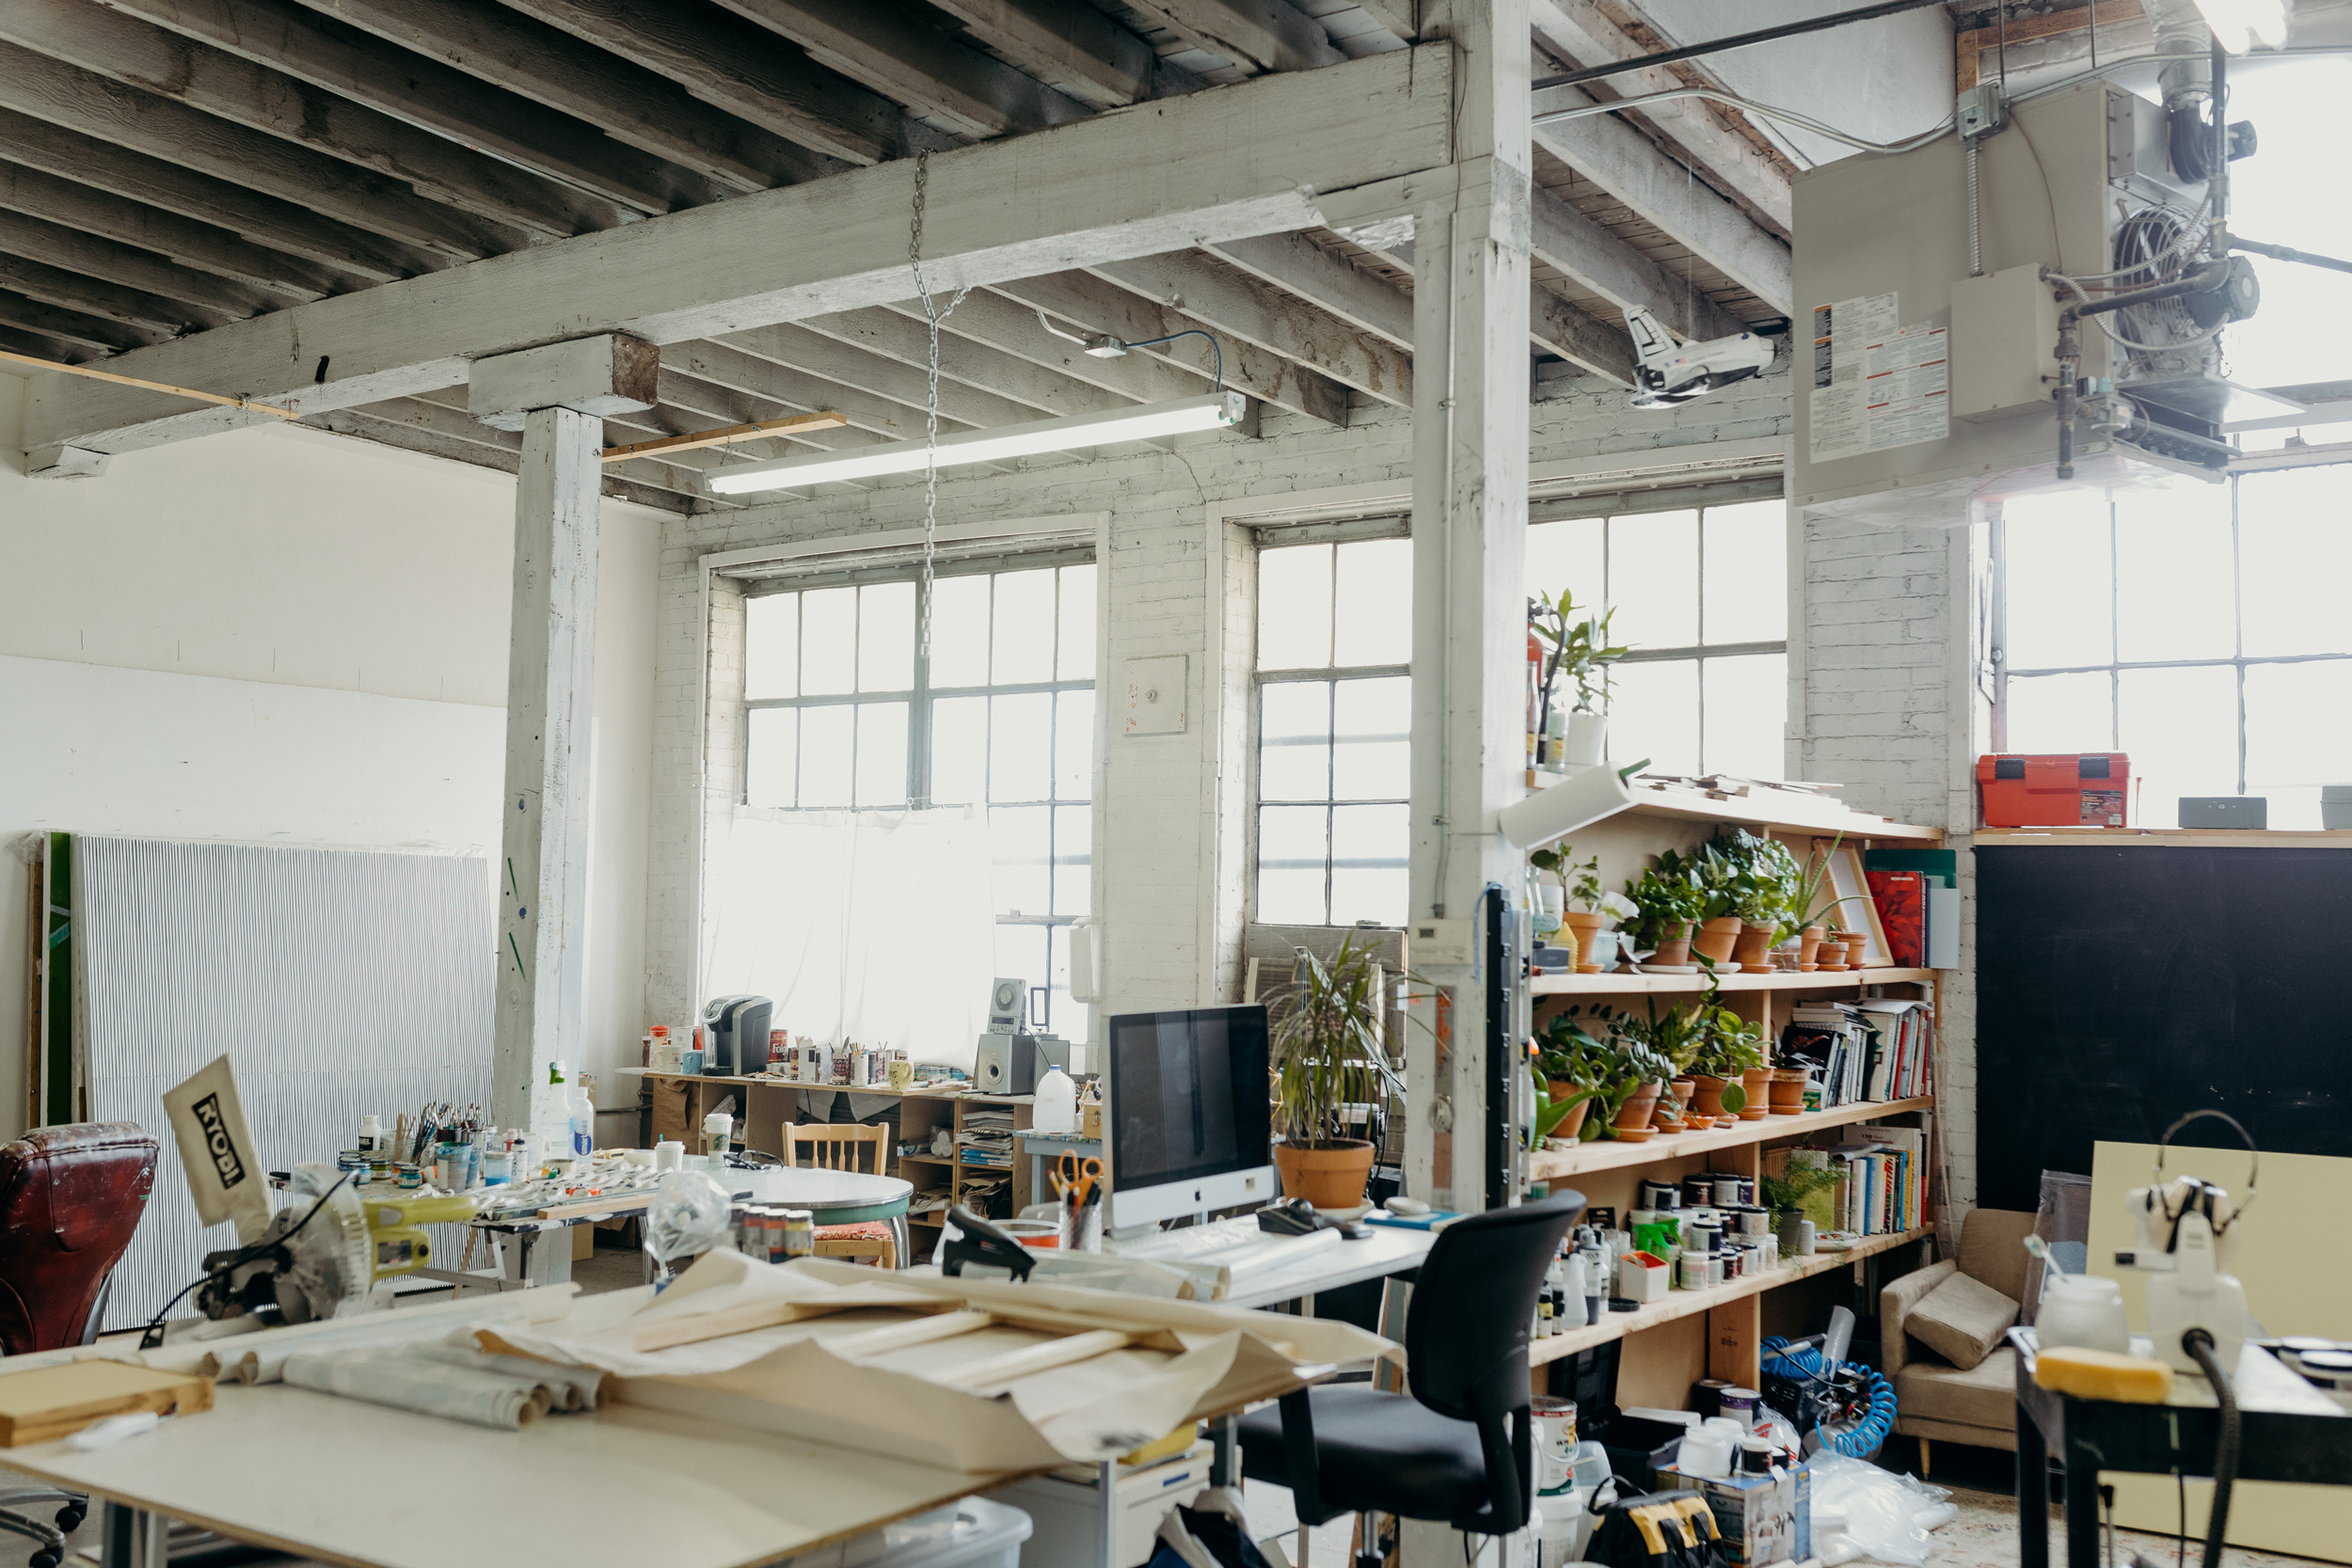 An indoor work space with high ceilings and tall windows. ﻿